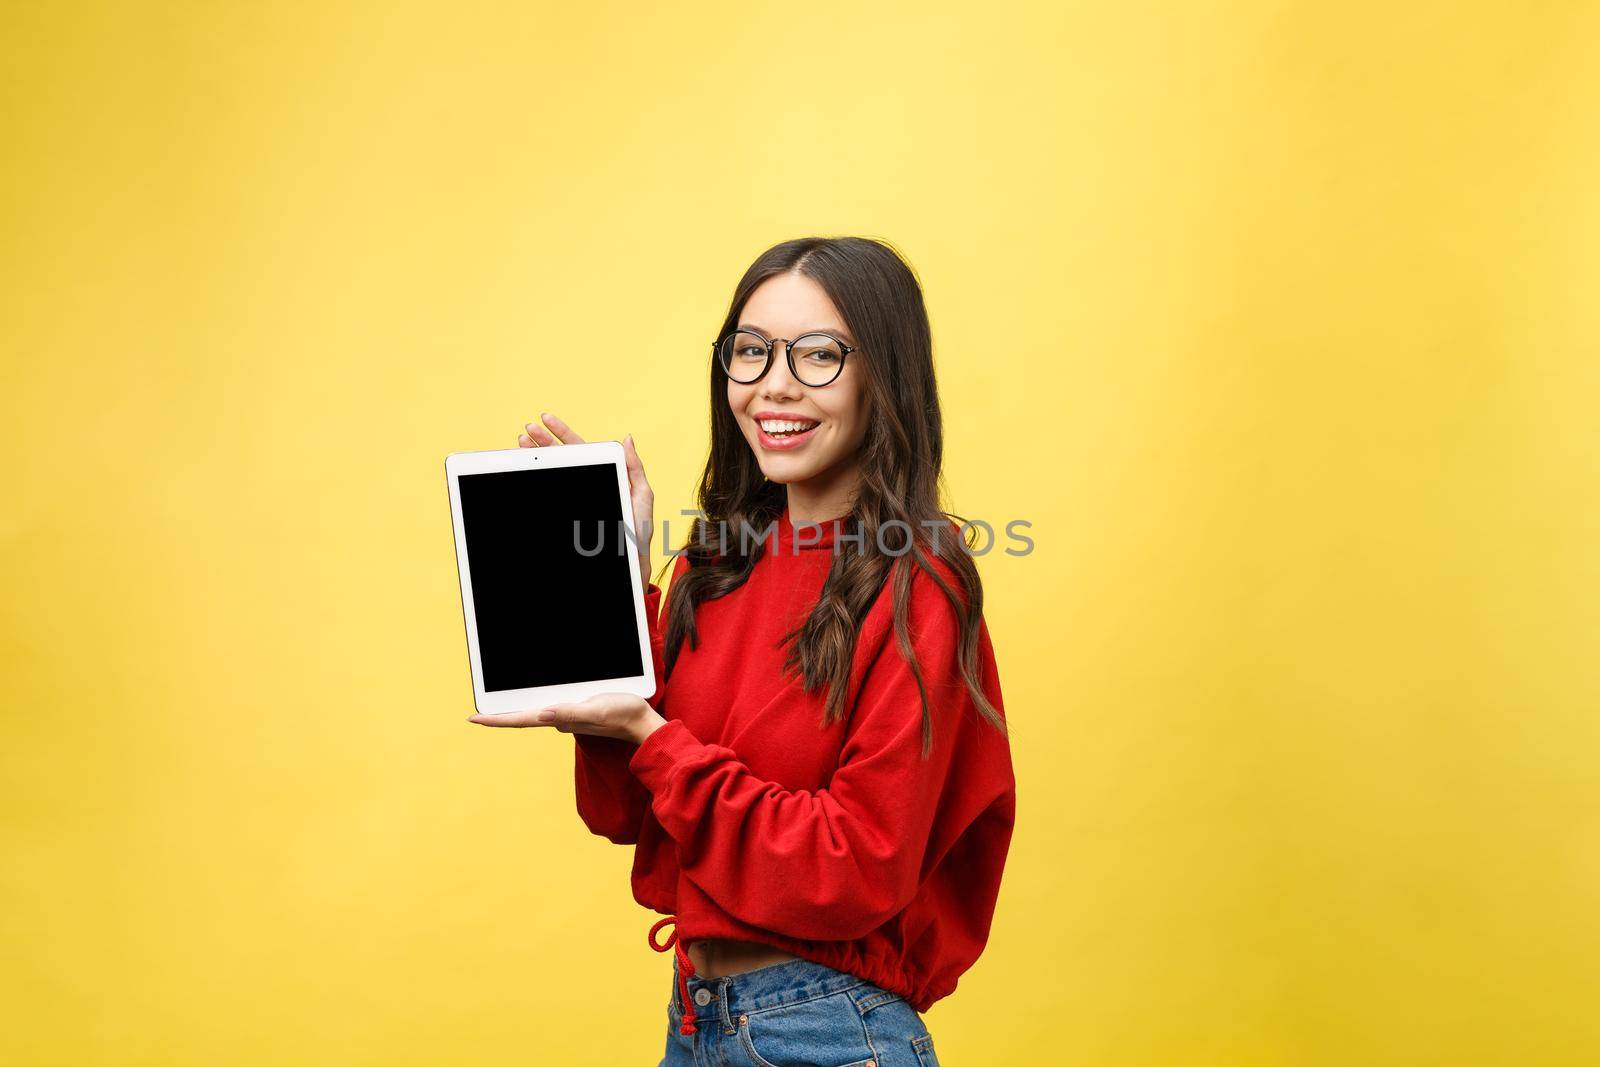 Woman using digital tablet computer PC isolated on yellow background.